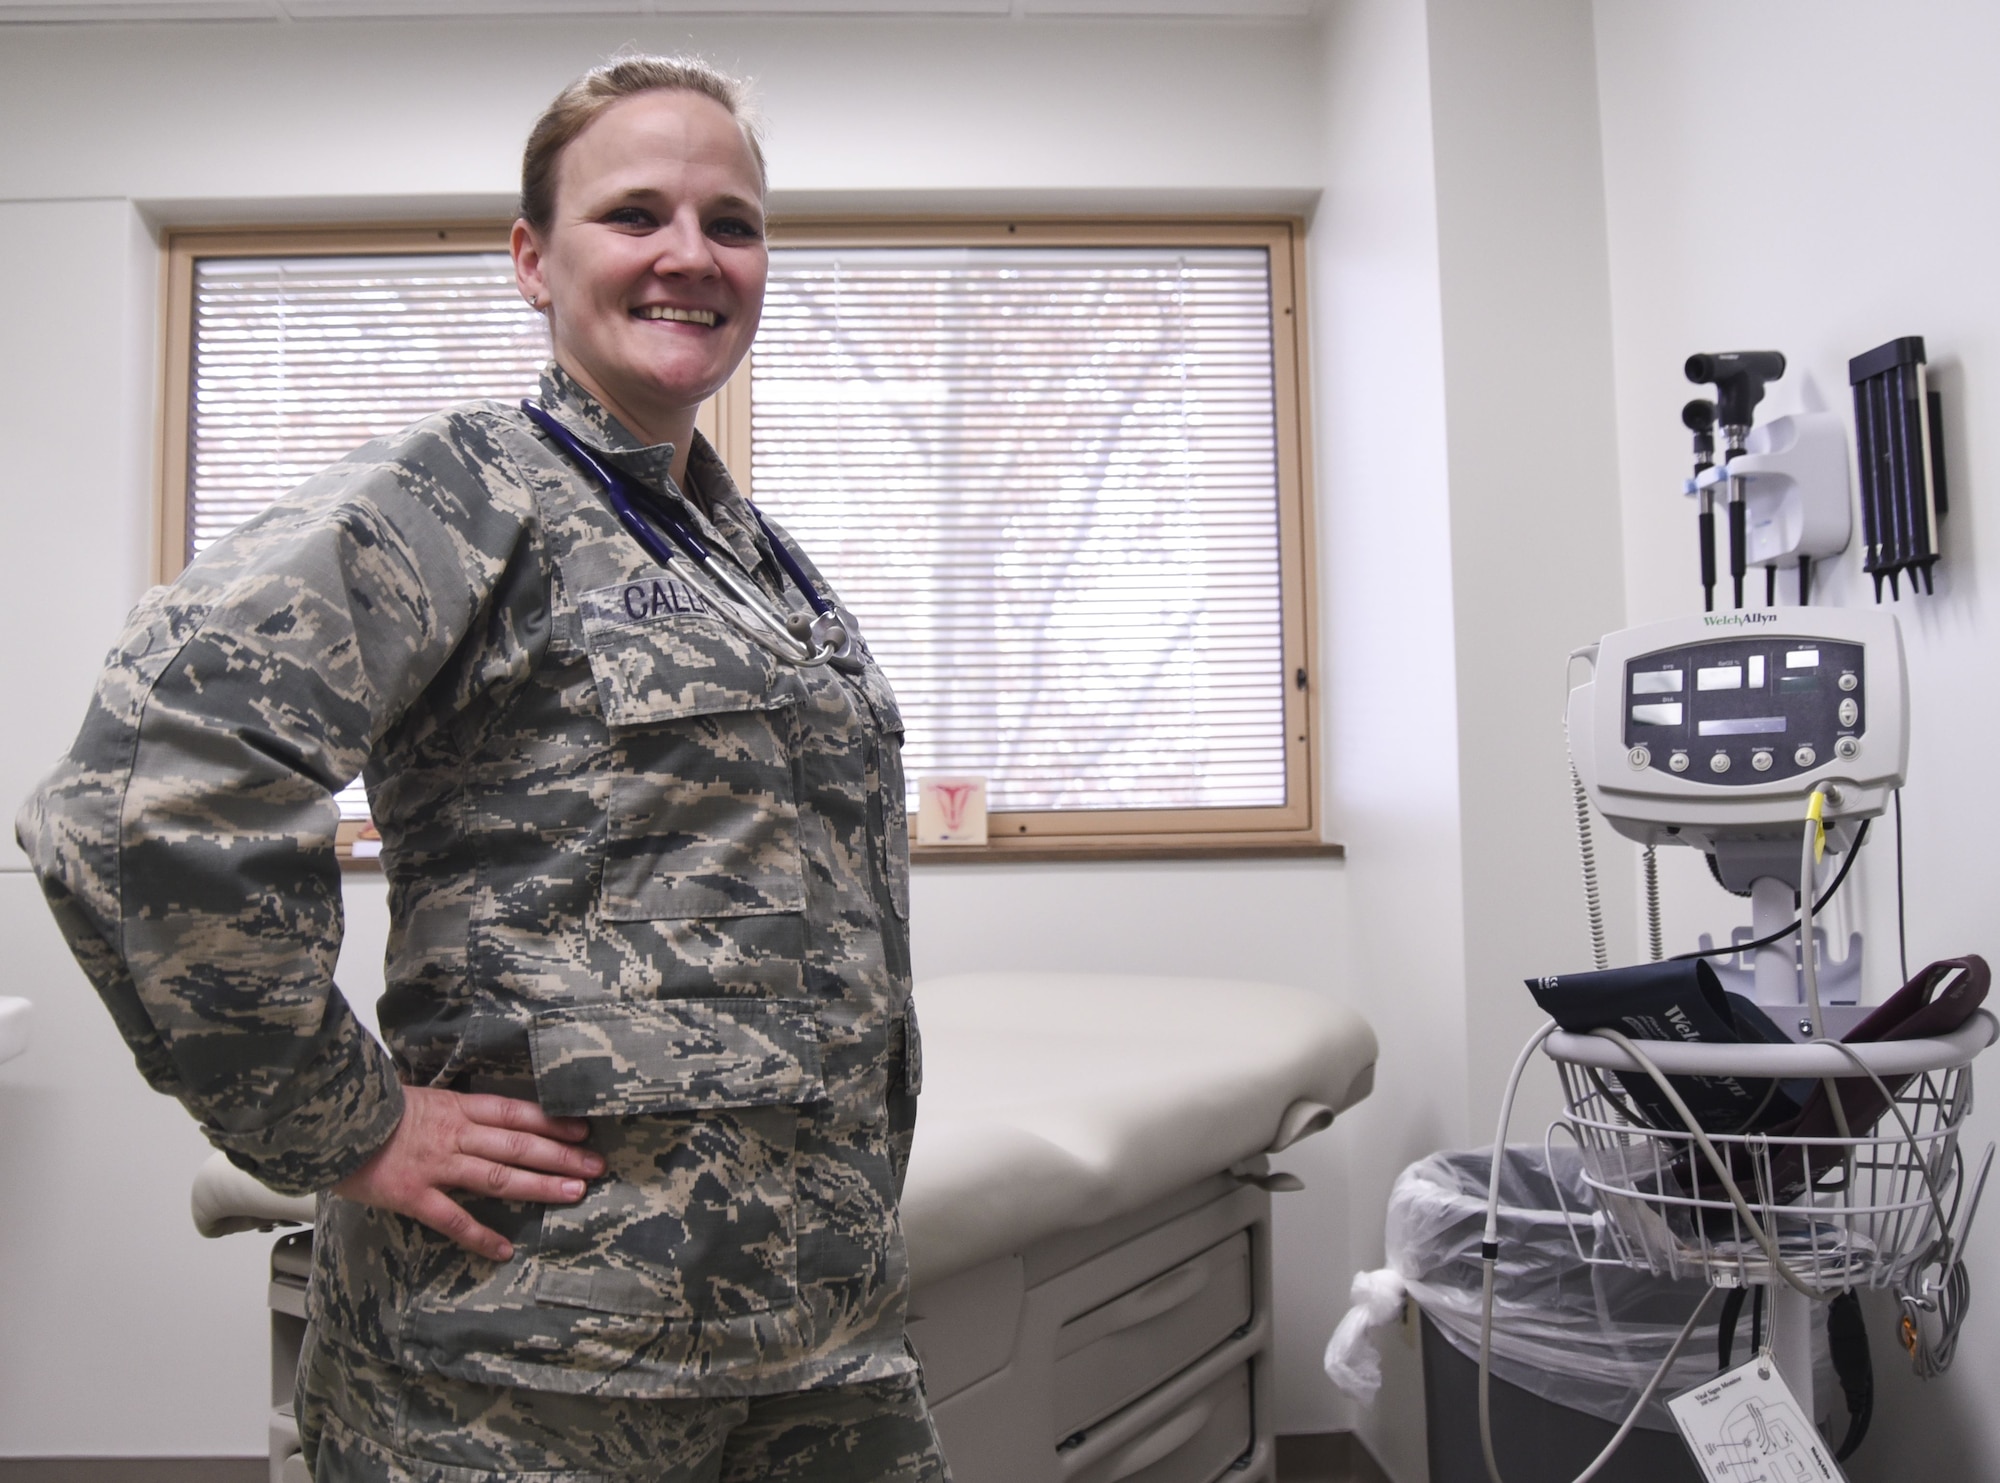 Maj. Cindy Callisto, 377 Medical Group nurse practitioner, was named the United States Air Force’s top nurse for 2017. Callisto credits her team for helping her persevere through an undermanned summer at Kirtland Air Force Base.